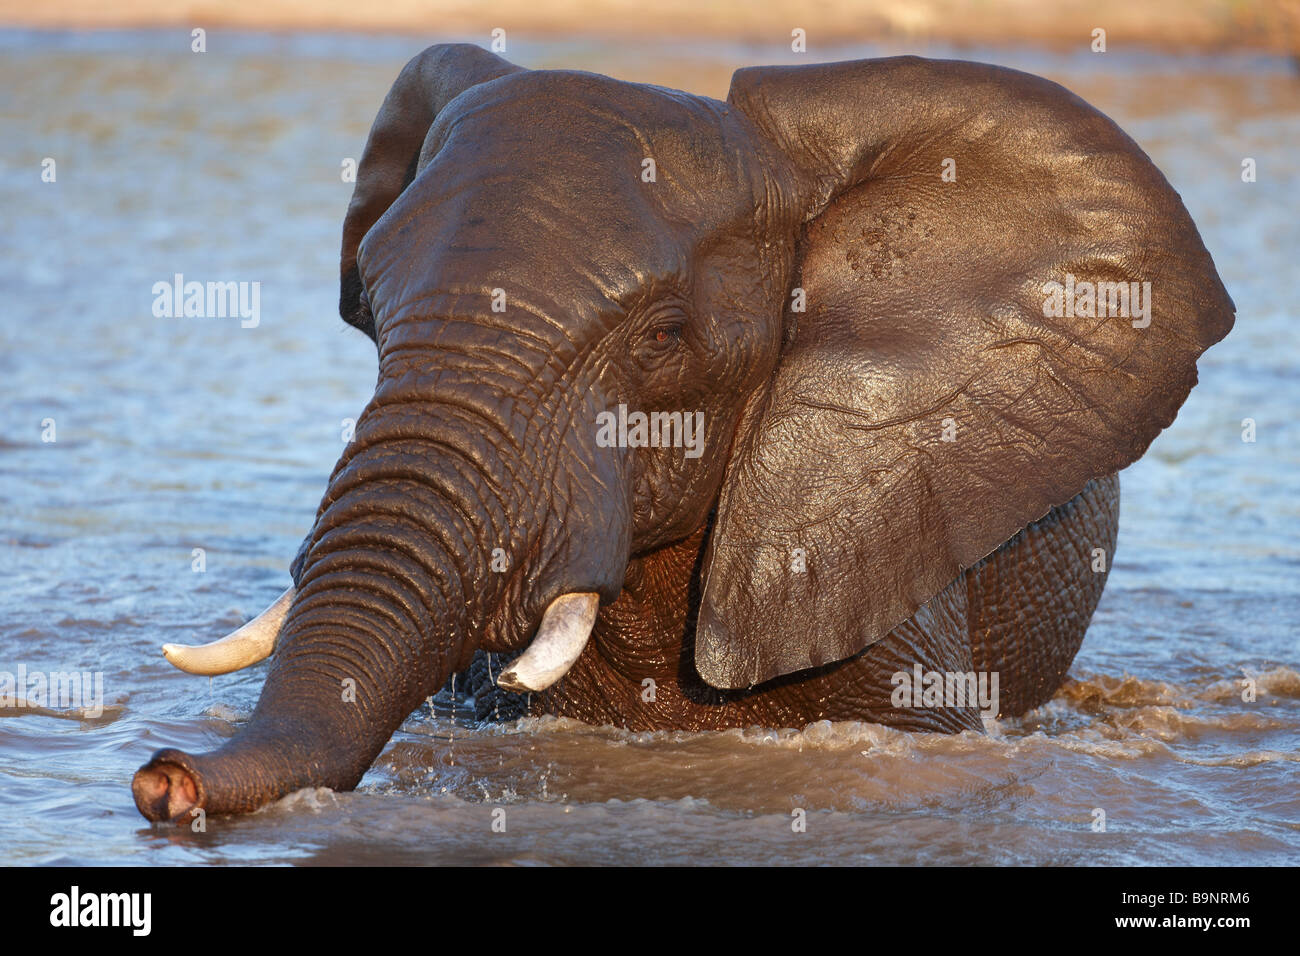 elephant wallowing in a waterhole, Kruger National Park, South Africa Stock Photo